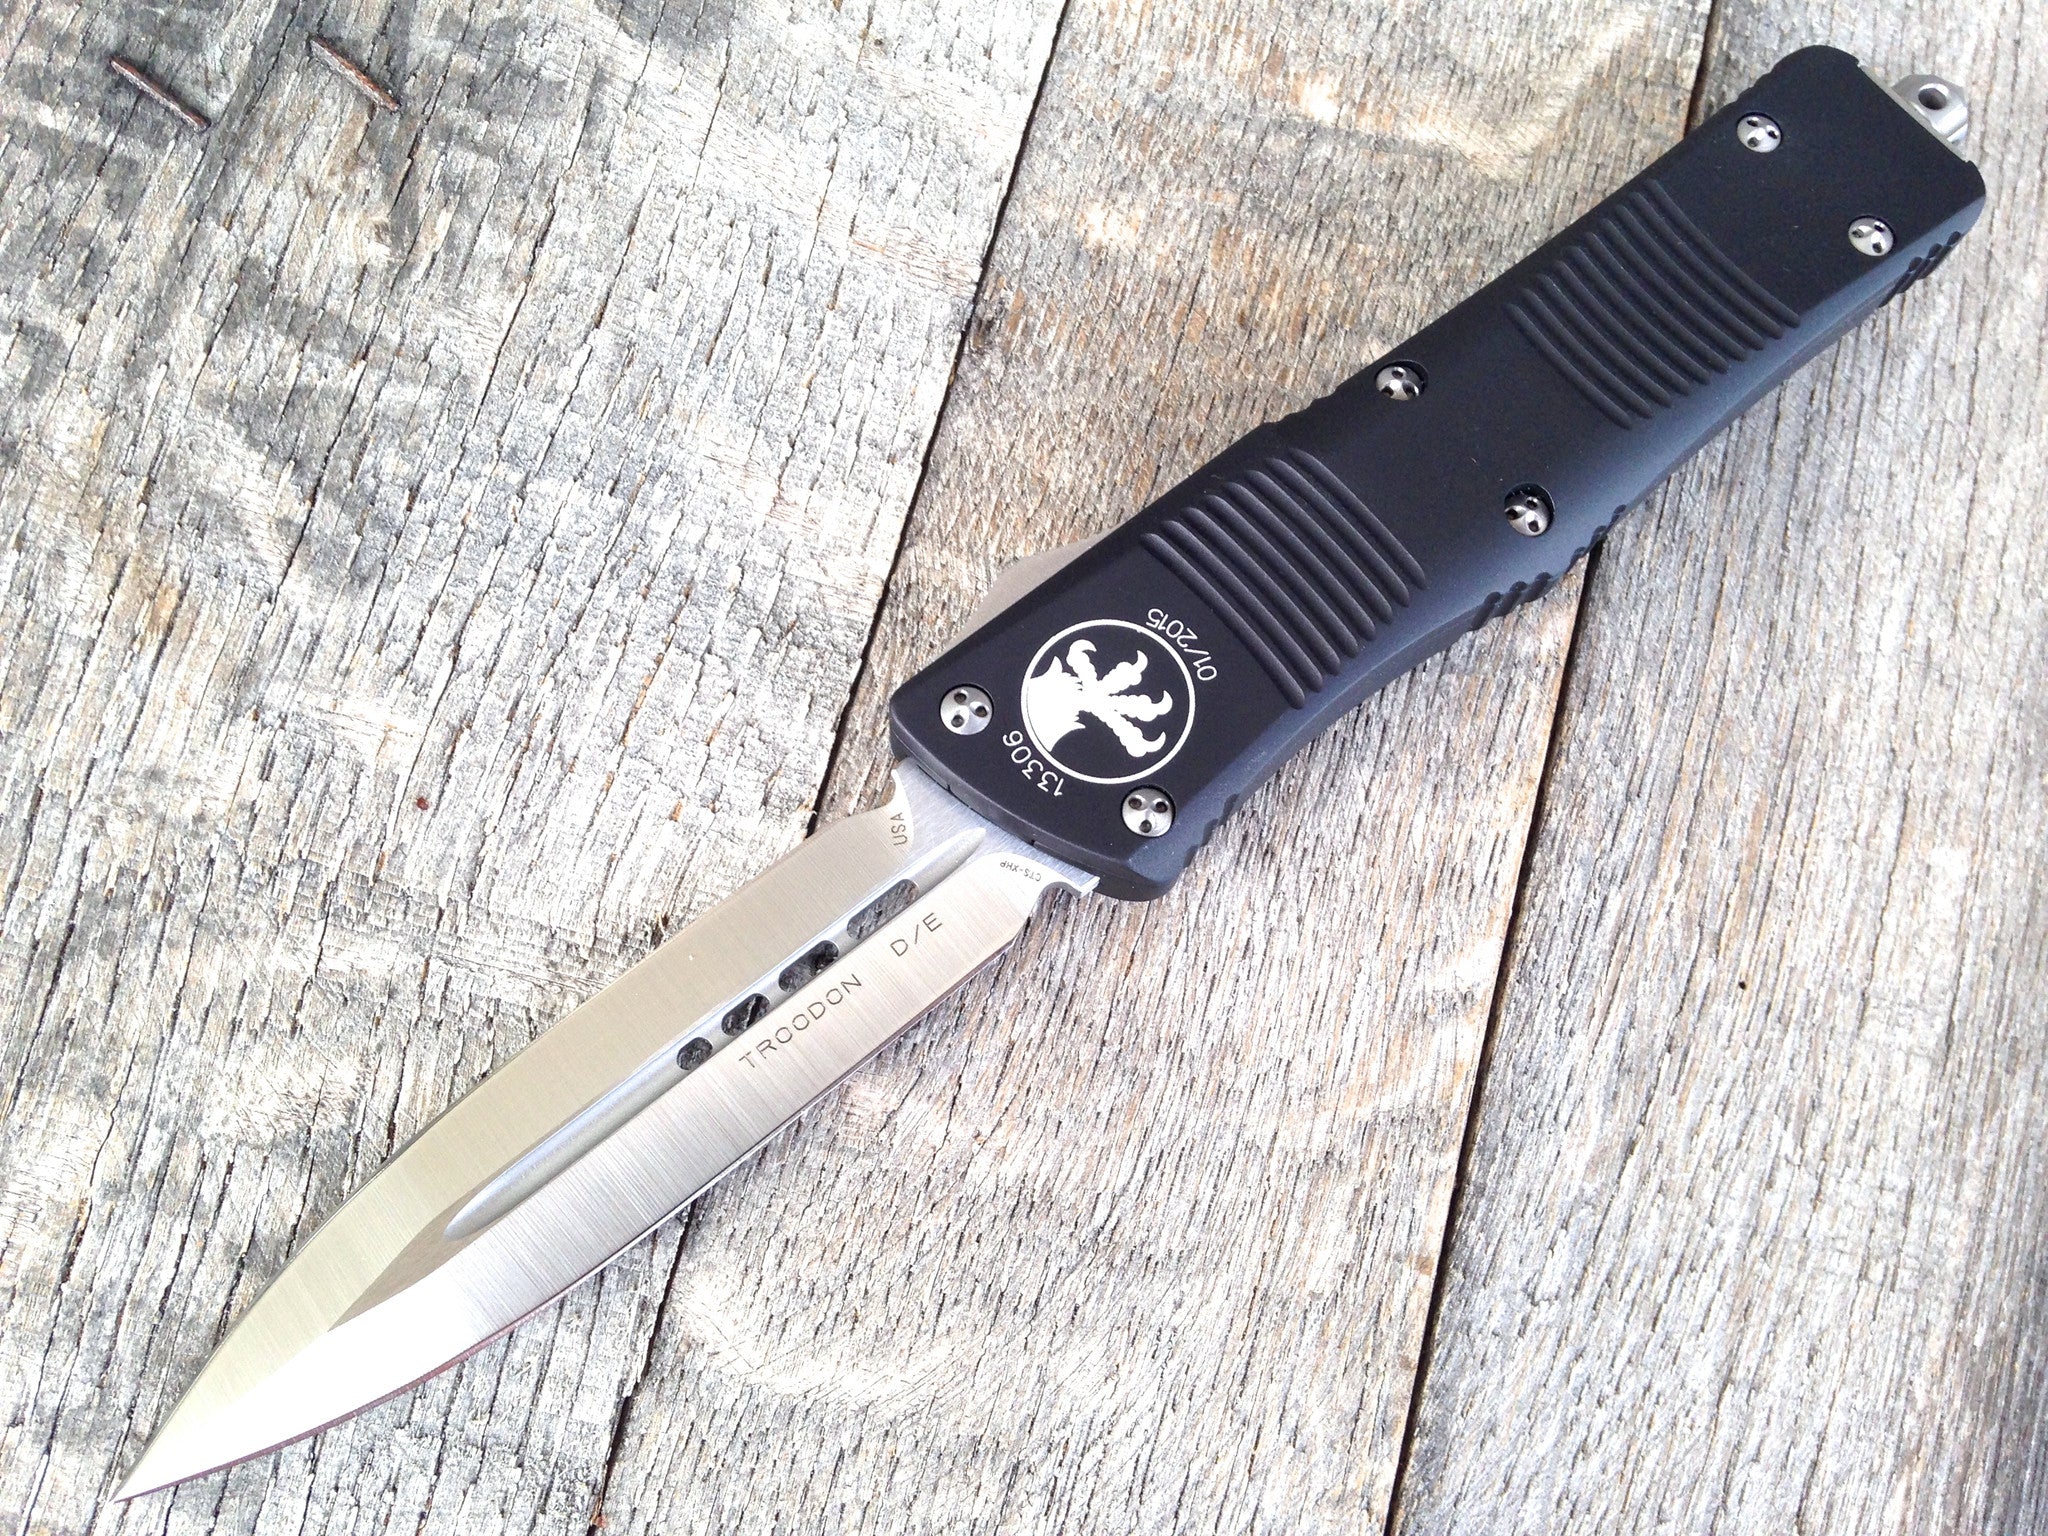 Microtech combat troodon